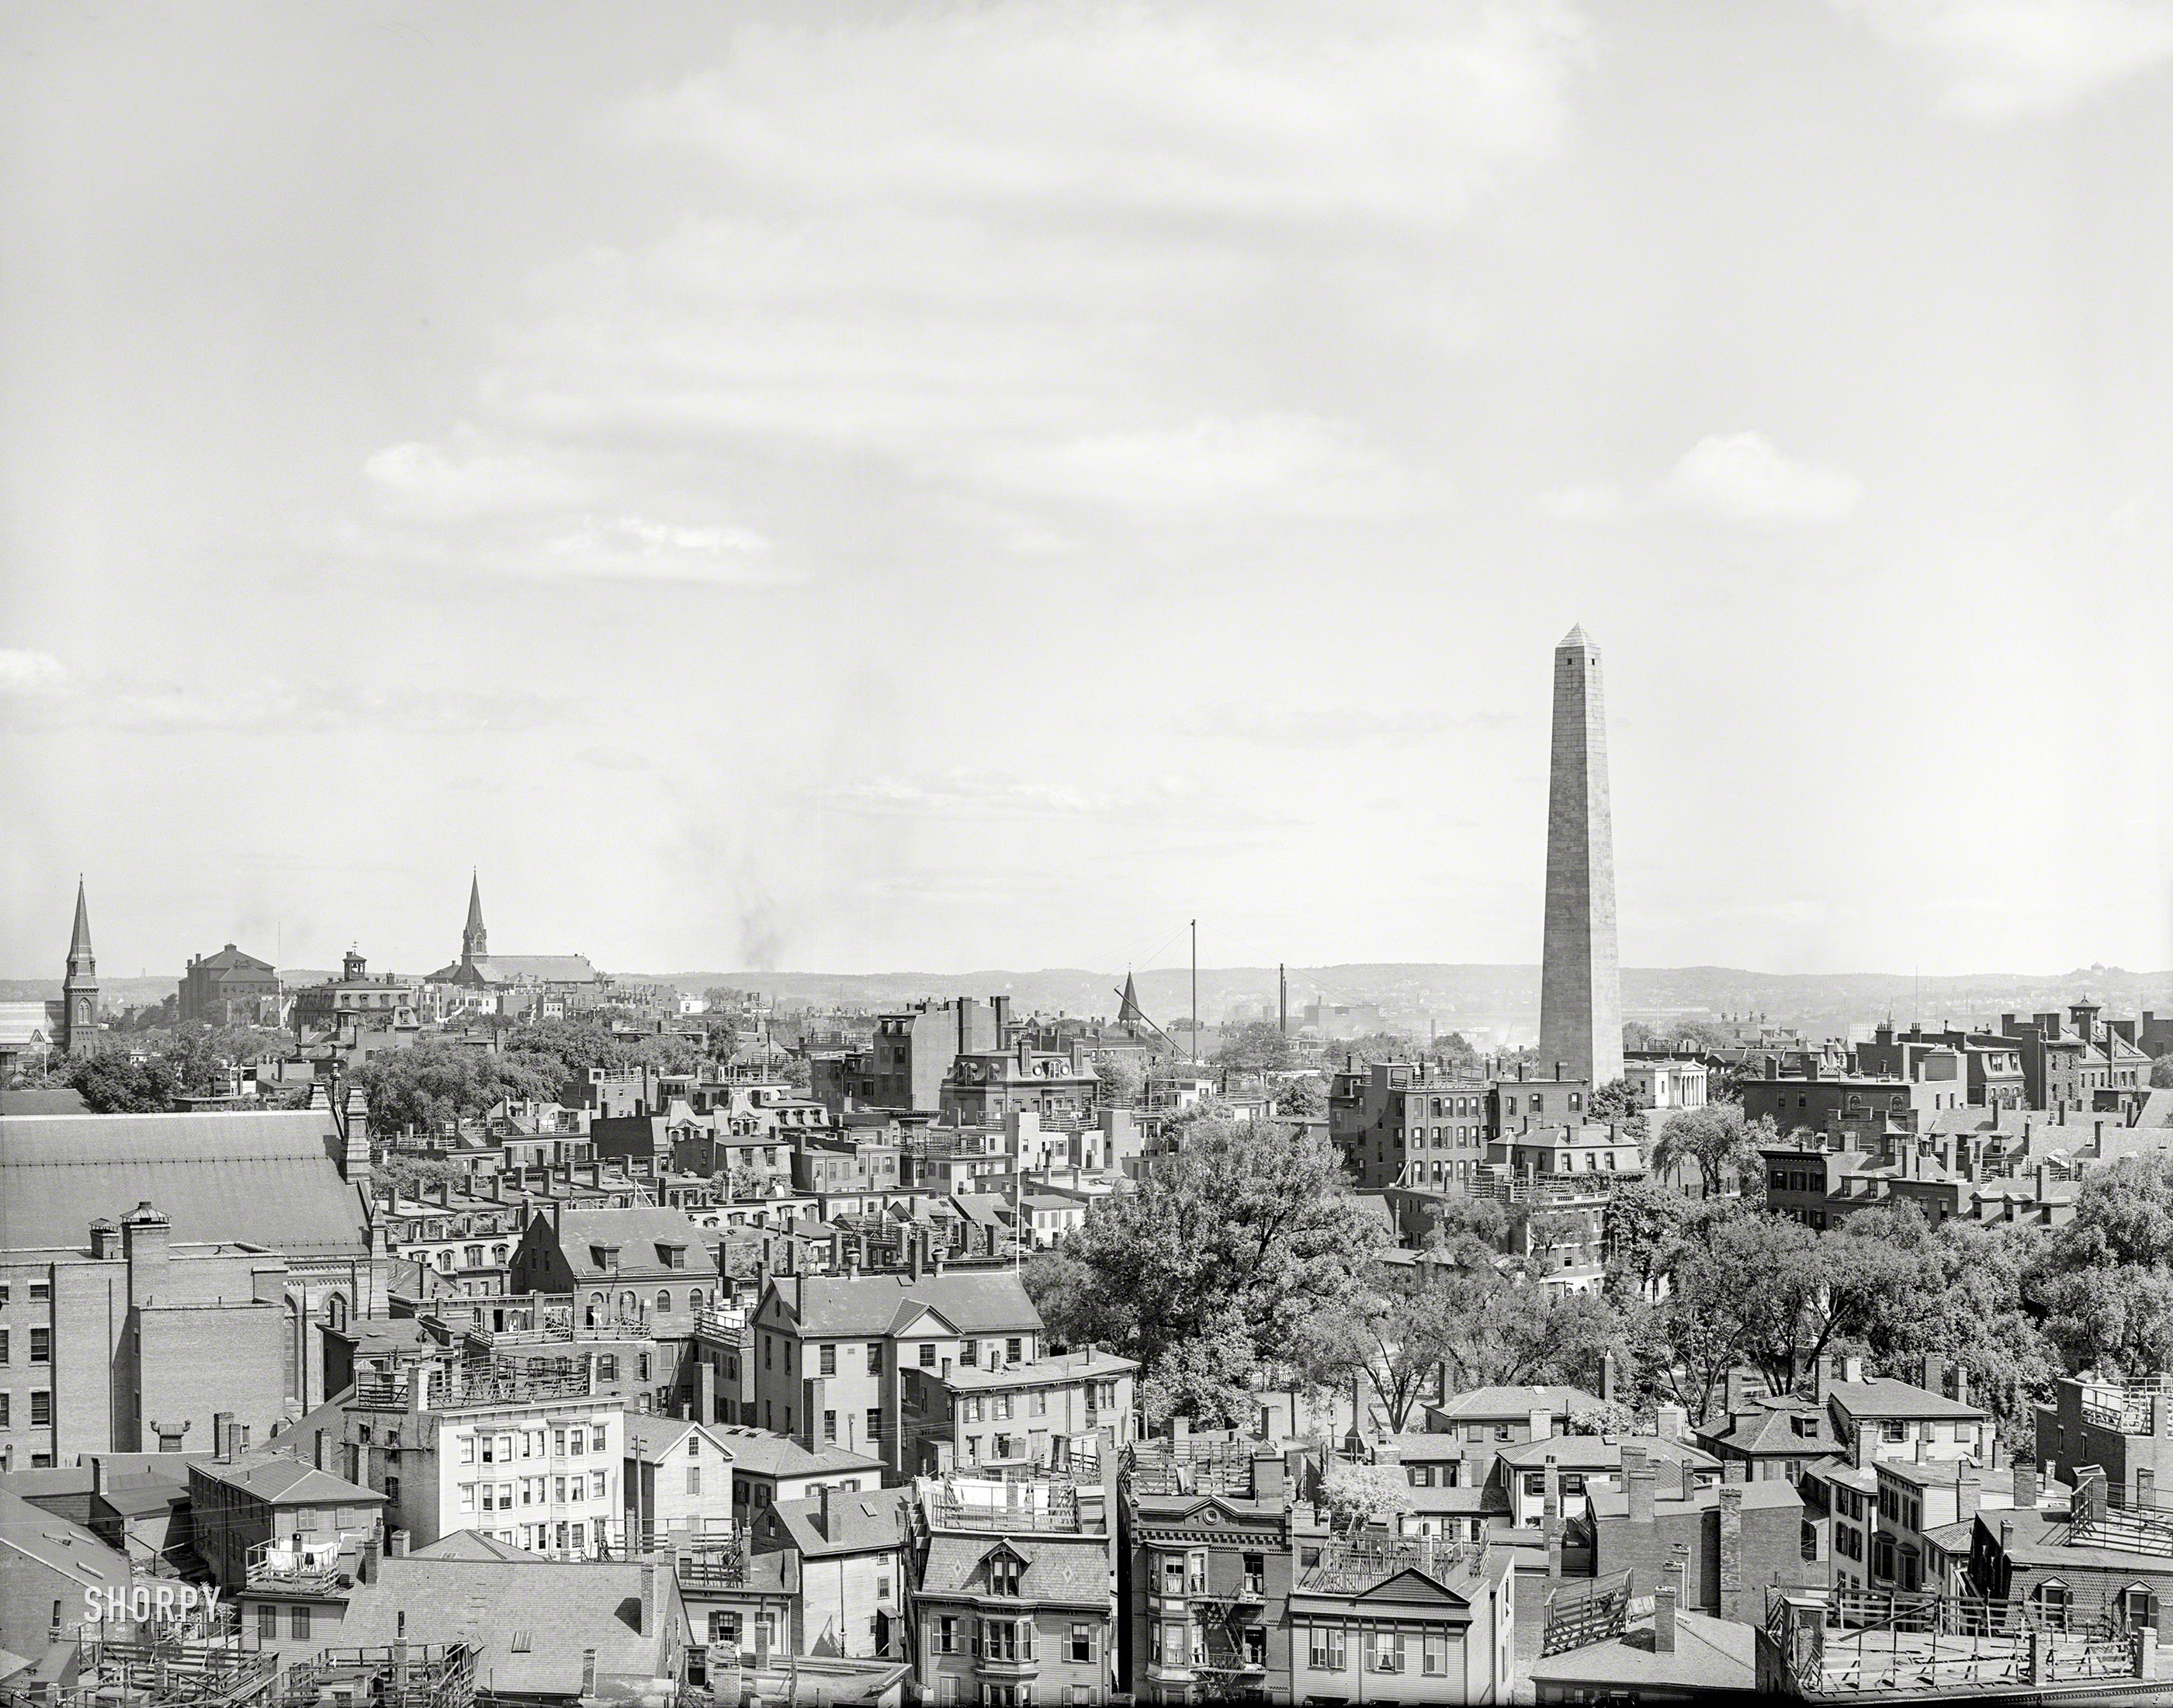 Circa 1890s Boston, Massachusetts. "Birdseye view of Charlestown & Bunker Hill Monument." Note the number and variety of fenced "roof yards." 8x10 inch glass negative, Detroit Photographic Company. View full size.